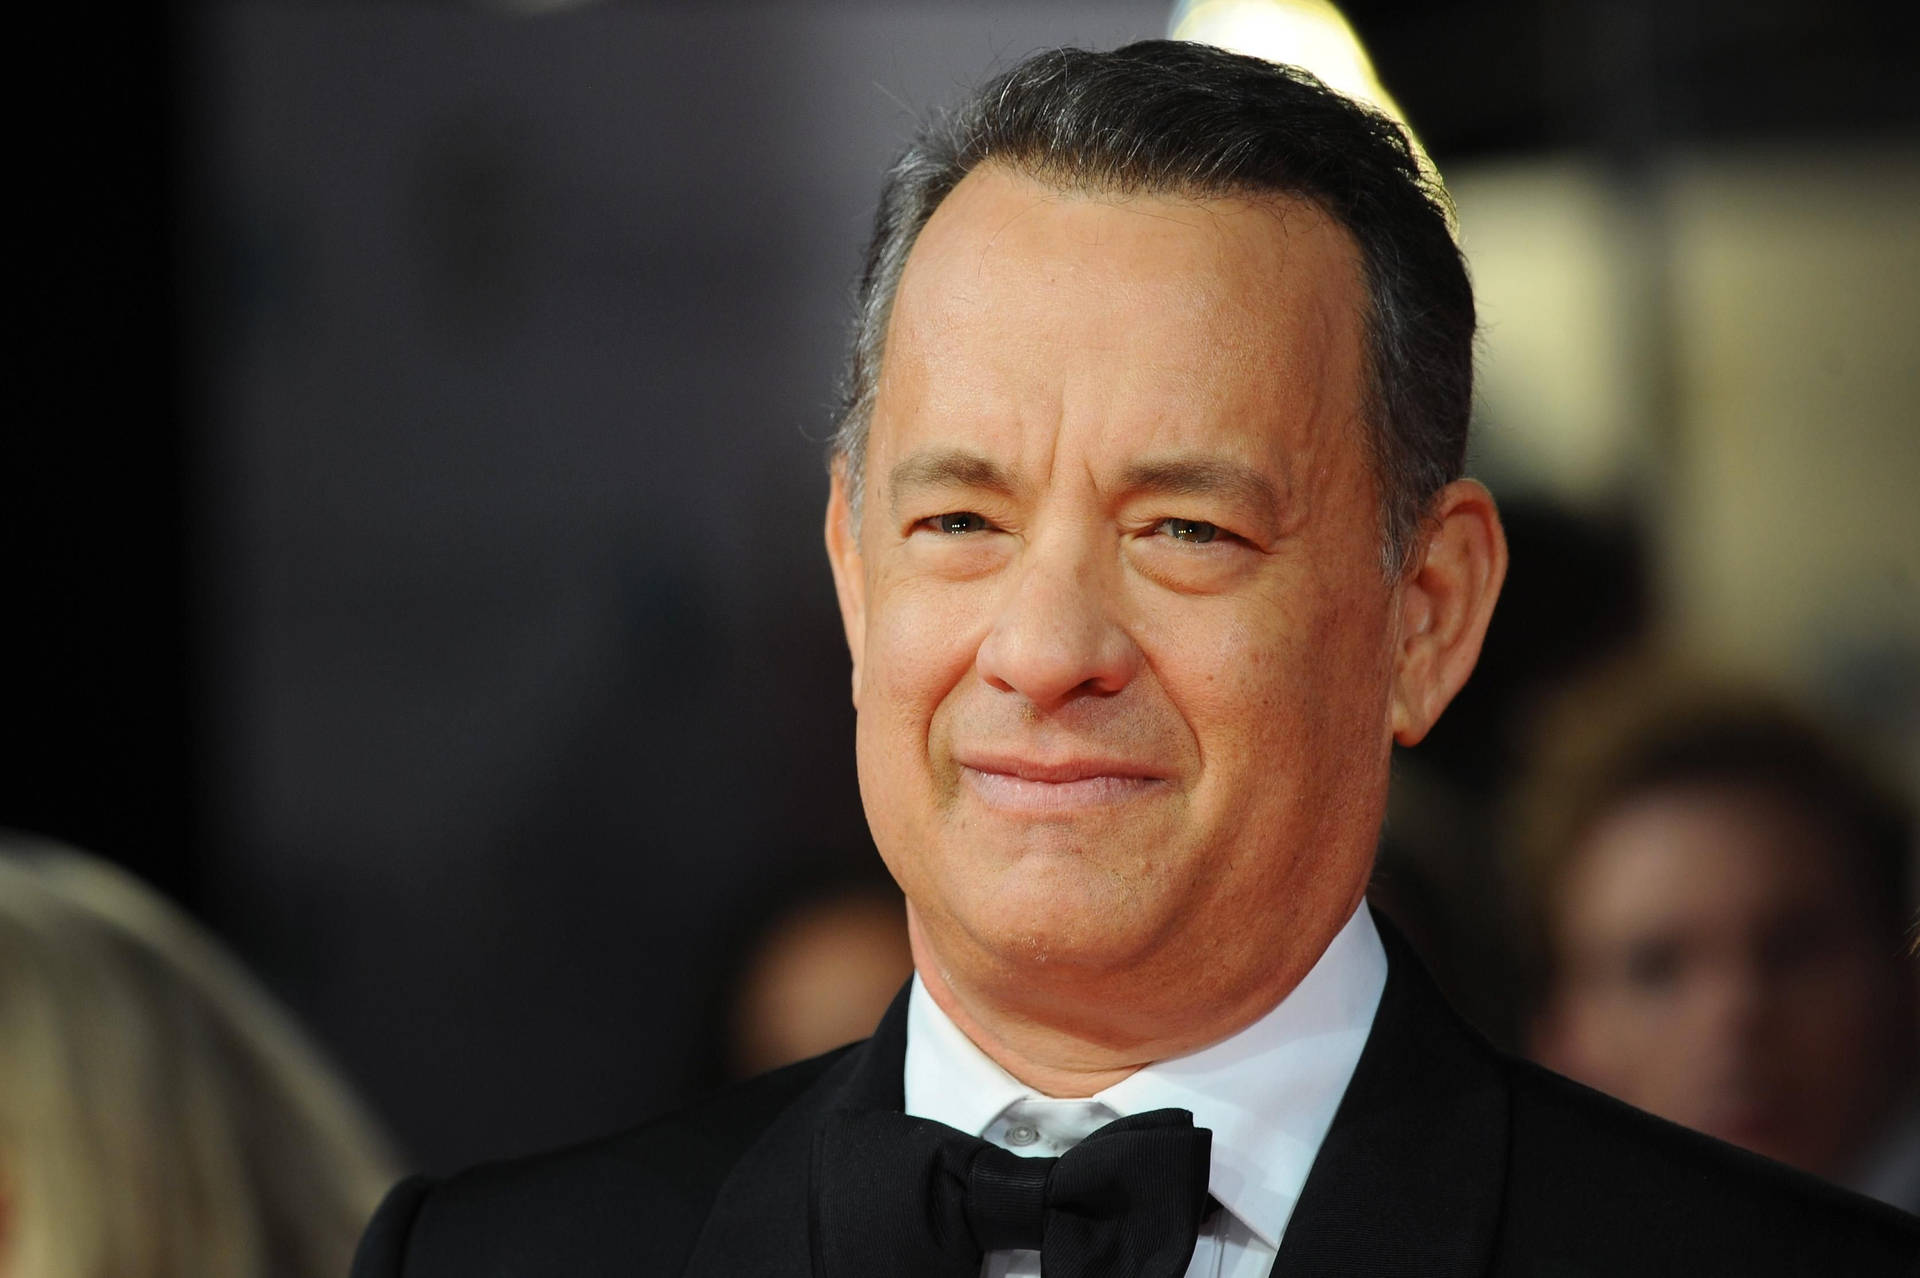 Tom Hanks Pictures